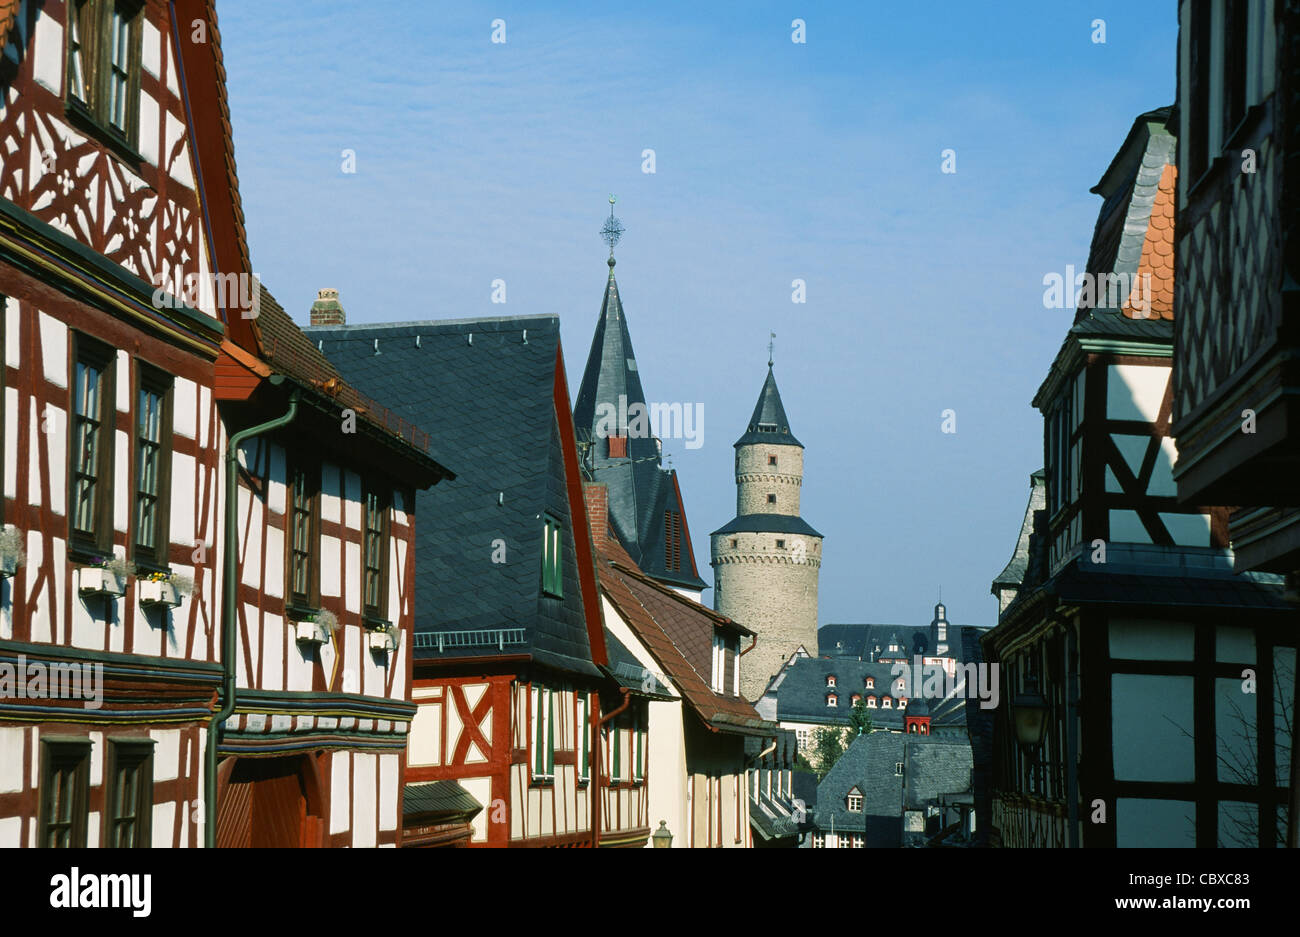 The old town of Idstein with half-timbered houses and the witch tower Hexenturm found in Hesse, Germany Stock Photo